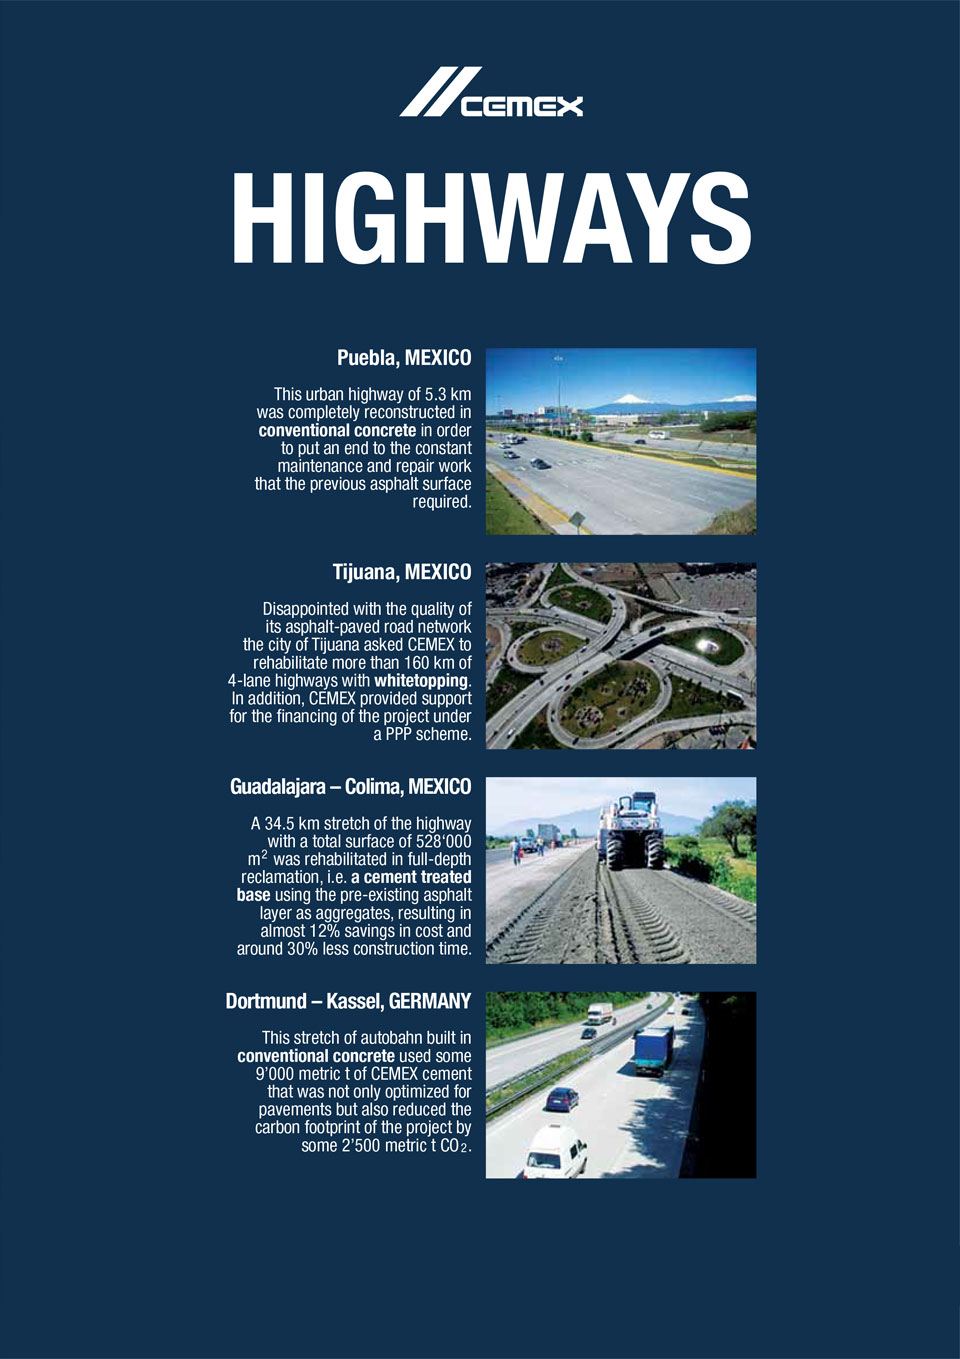 the image shows several of the highways that CEMEX has helped with the construction of